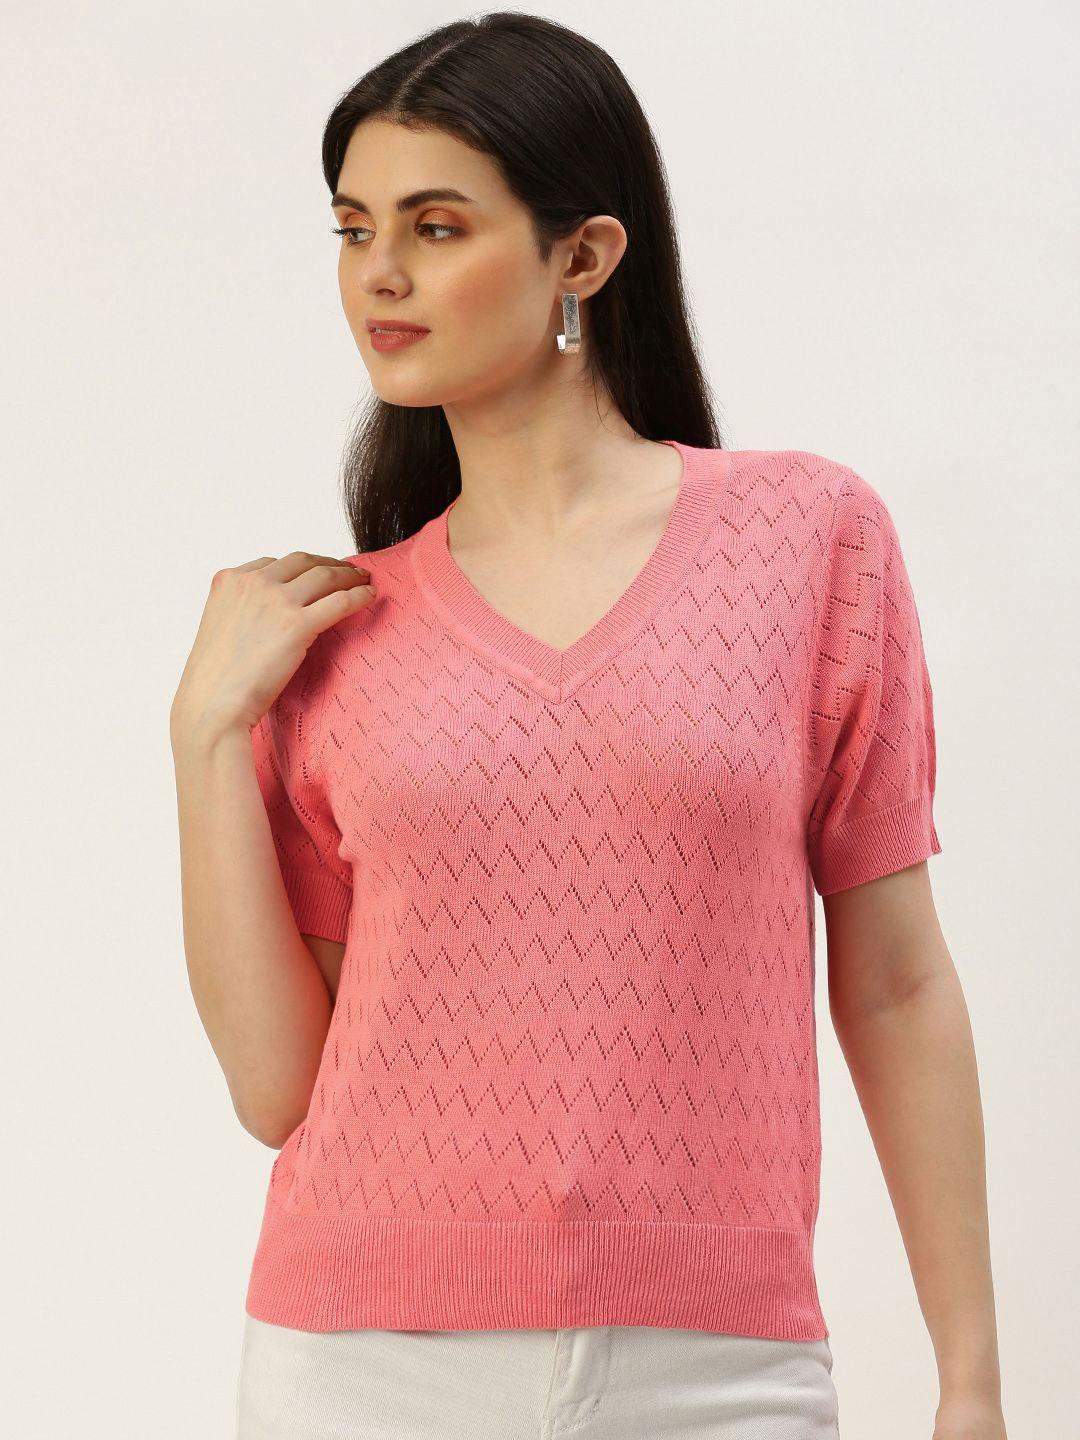 and-v-neck-knitted-self-design-short-sleeves-top